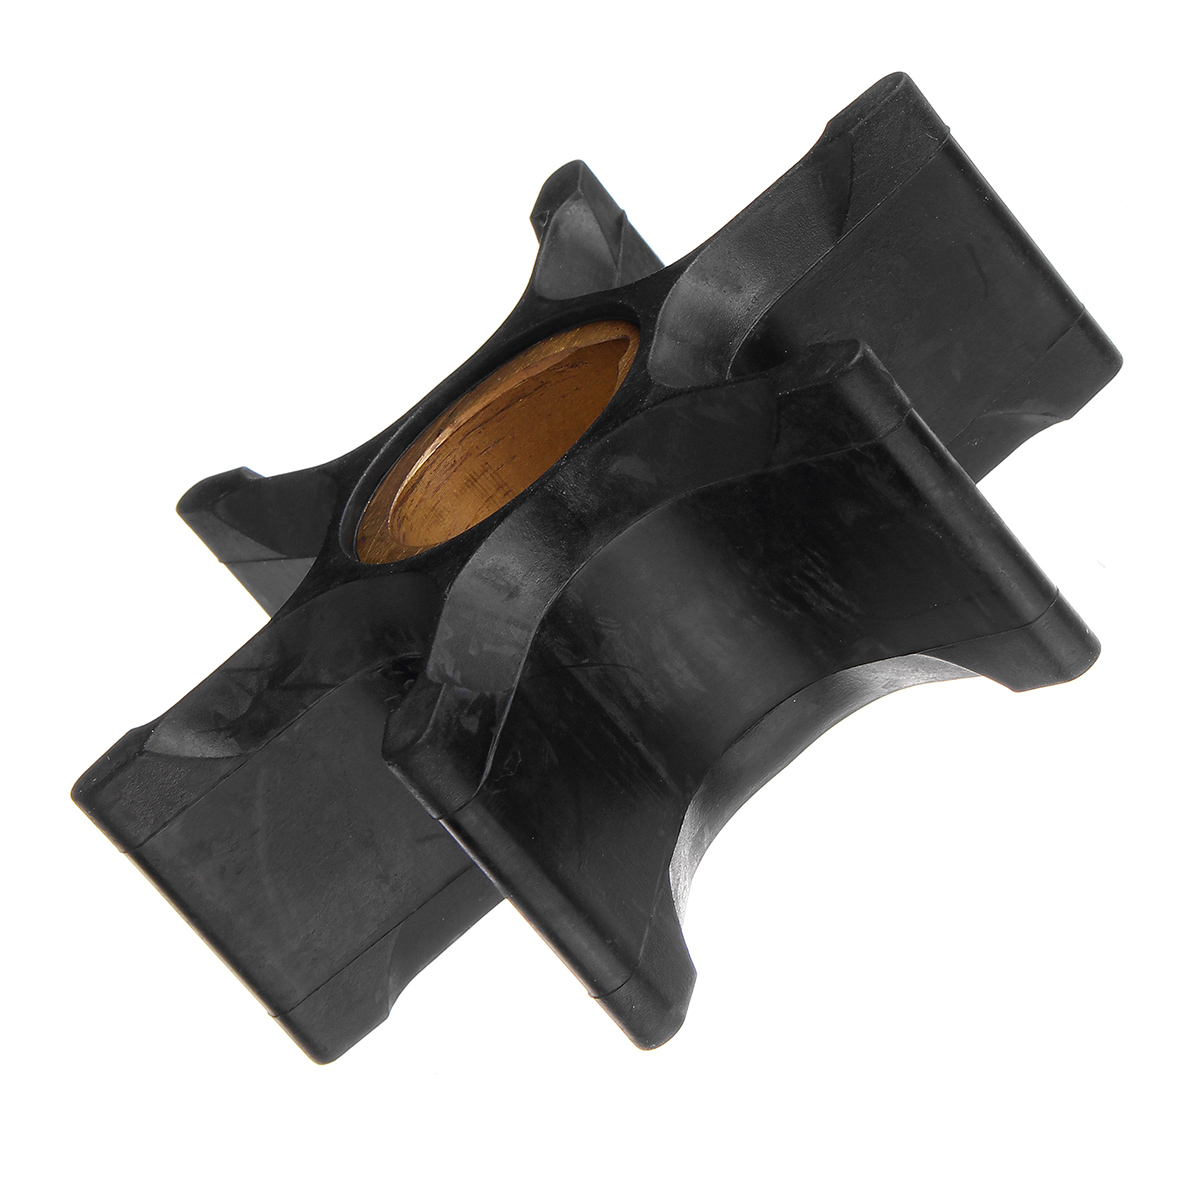 Water Pump Impeller for Johnson/Evinrude 90-300HP Outboard Replacement 18-3059 - Auto GoShop